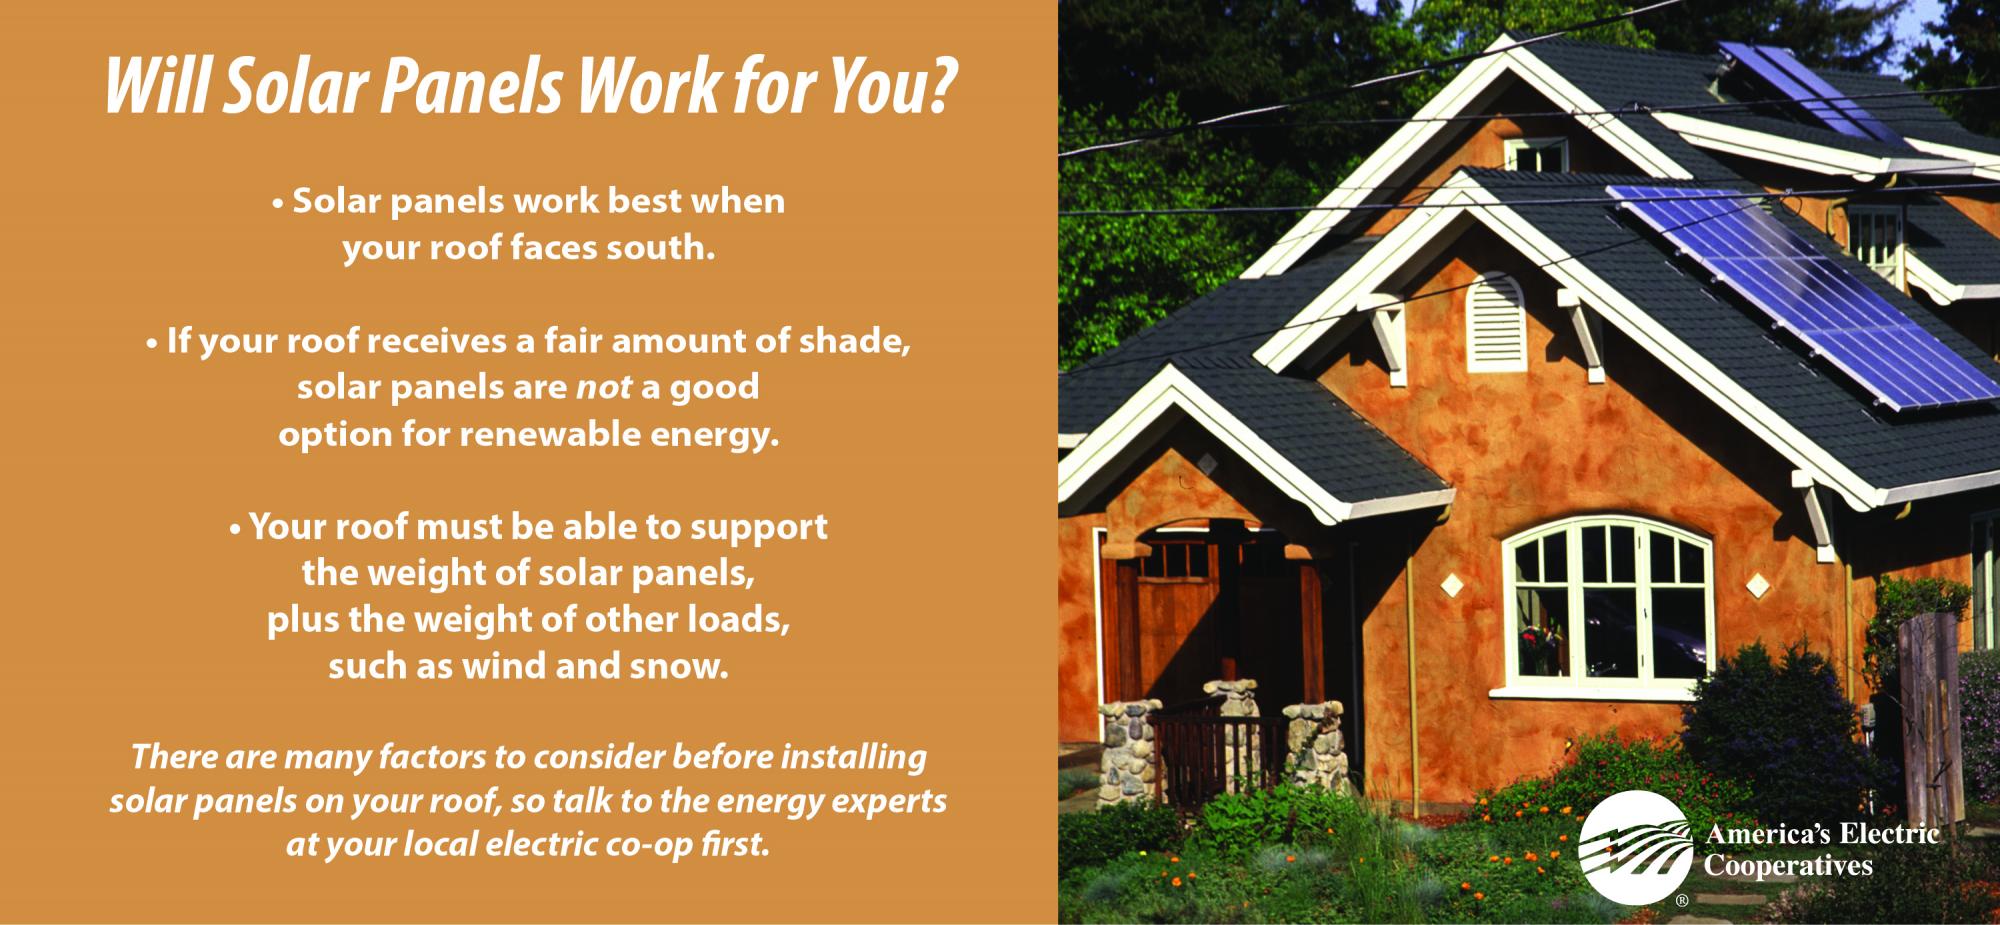 Will Solar Power Work For You?